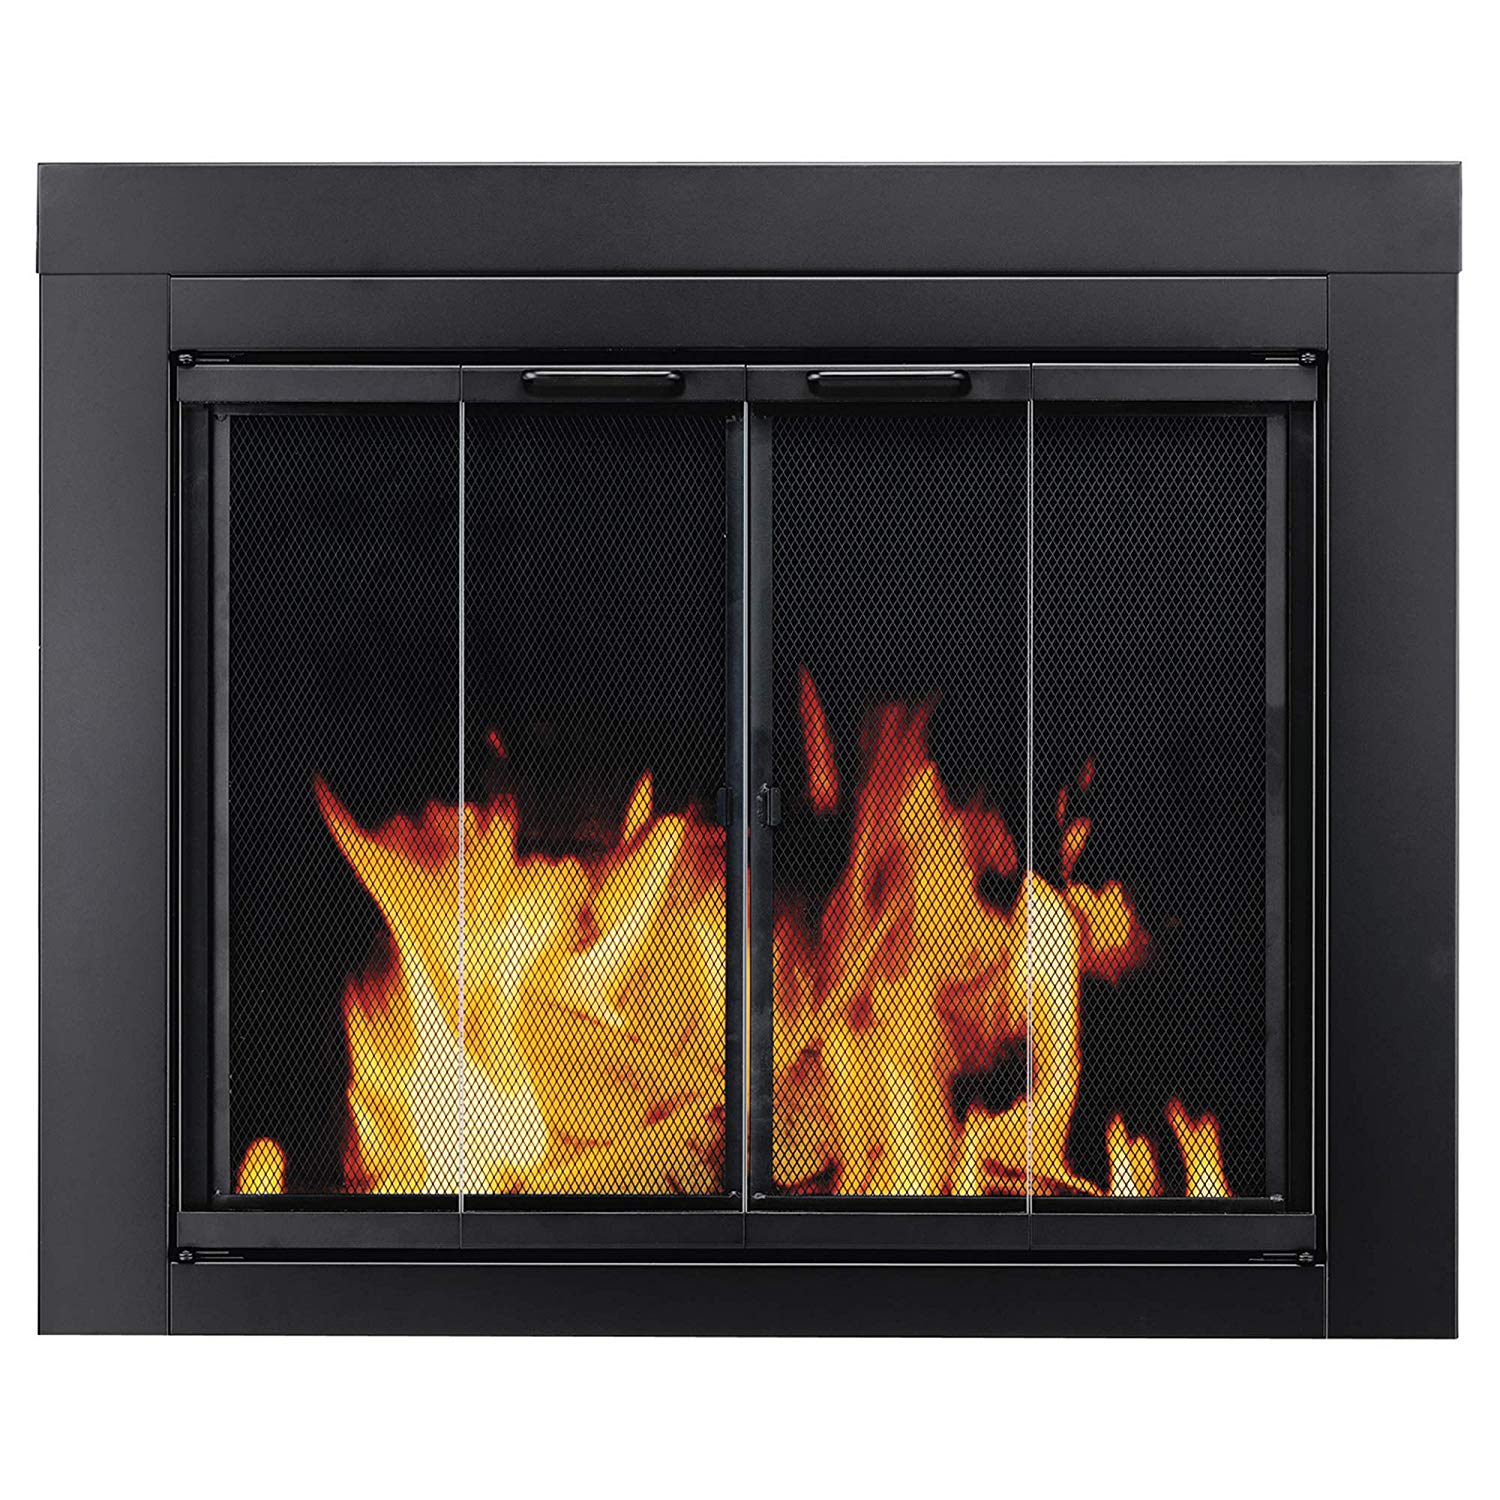 Fireplace with Hearth Lovely Pleasant Hearth at 1000 ascot Fireplace Glass Door Black Small